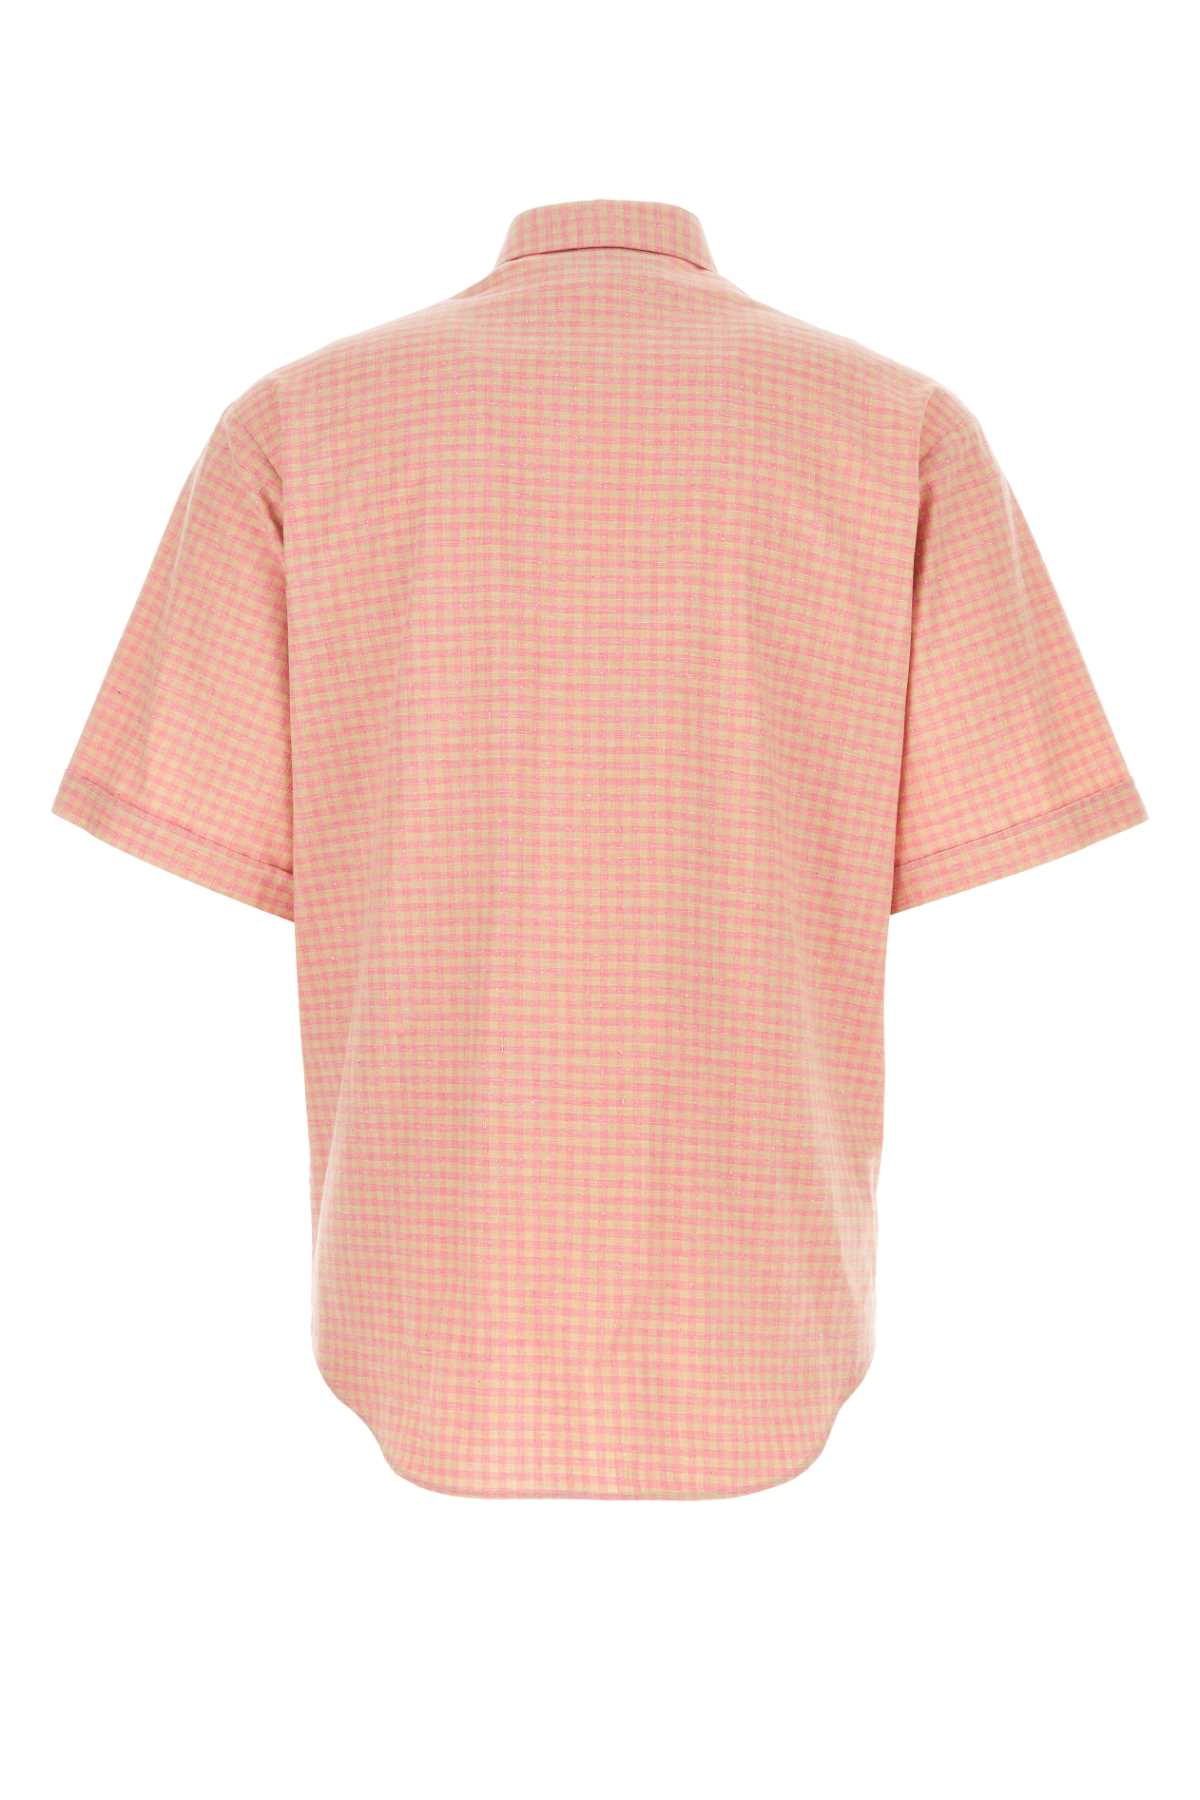 Gucci Embroidered Cotton Shirt In Pink/beige/mix